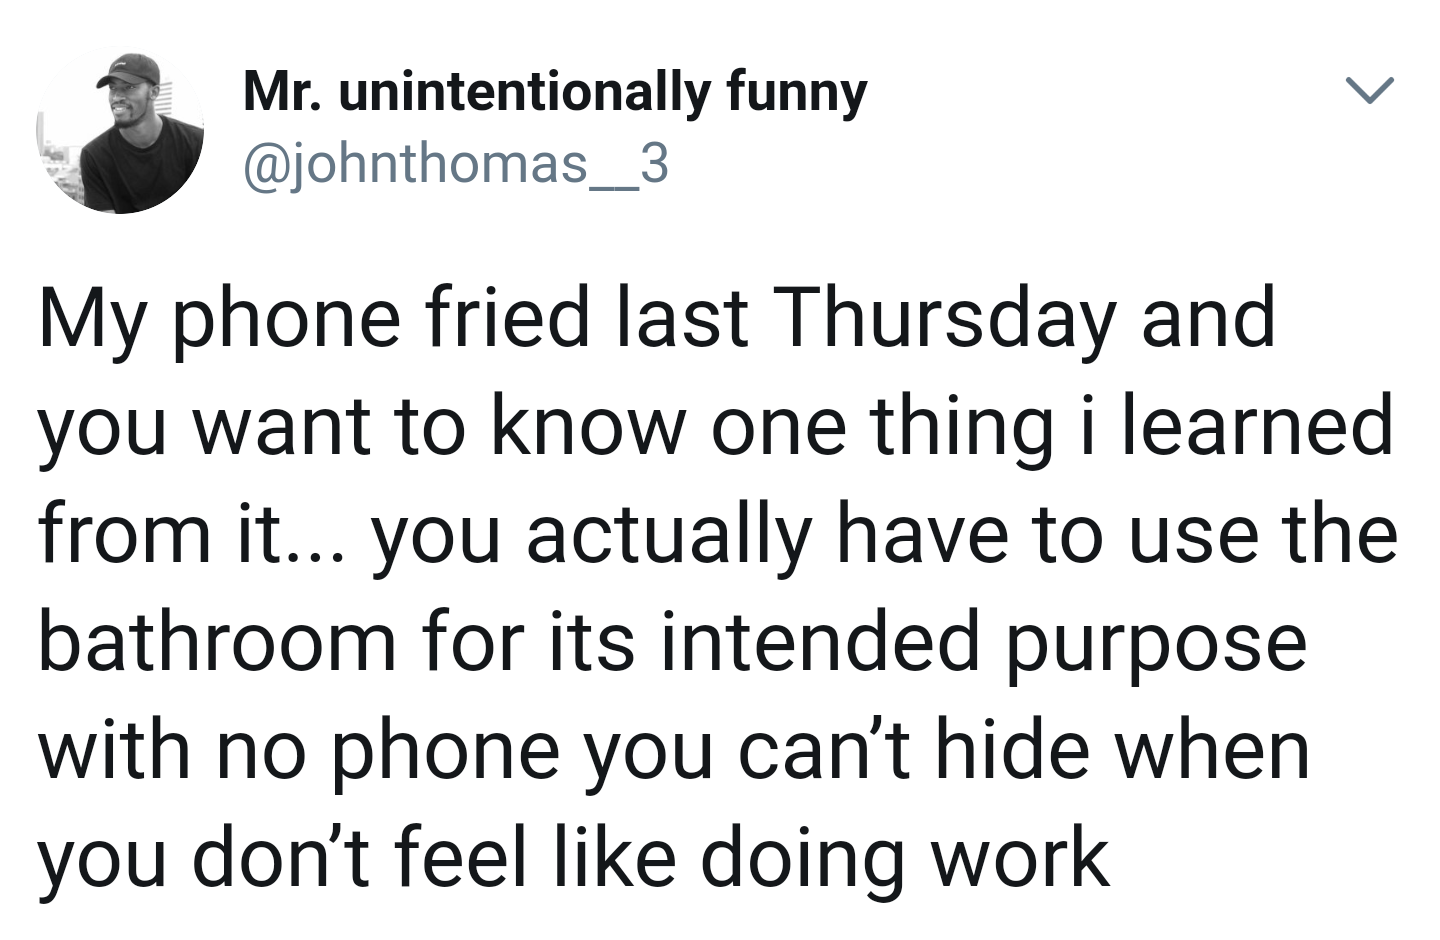 memes - animal - Mr. unintentionally funny My phone fried last Thursday and you want to know one thing i learned from it... you actually have to use the bathroom for its intended purpose with no phone you can't hide when you don't feel doing work